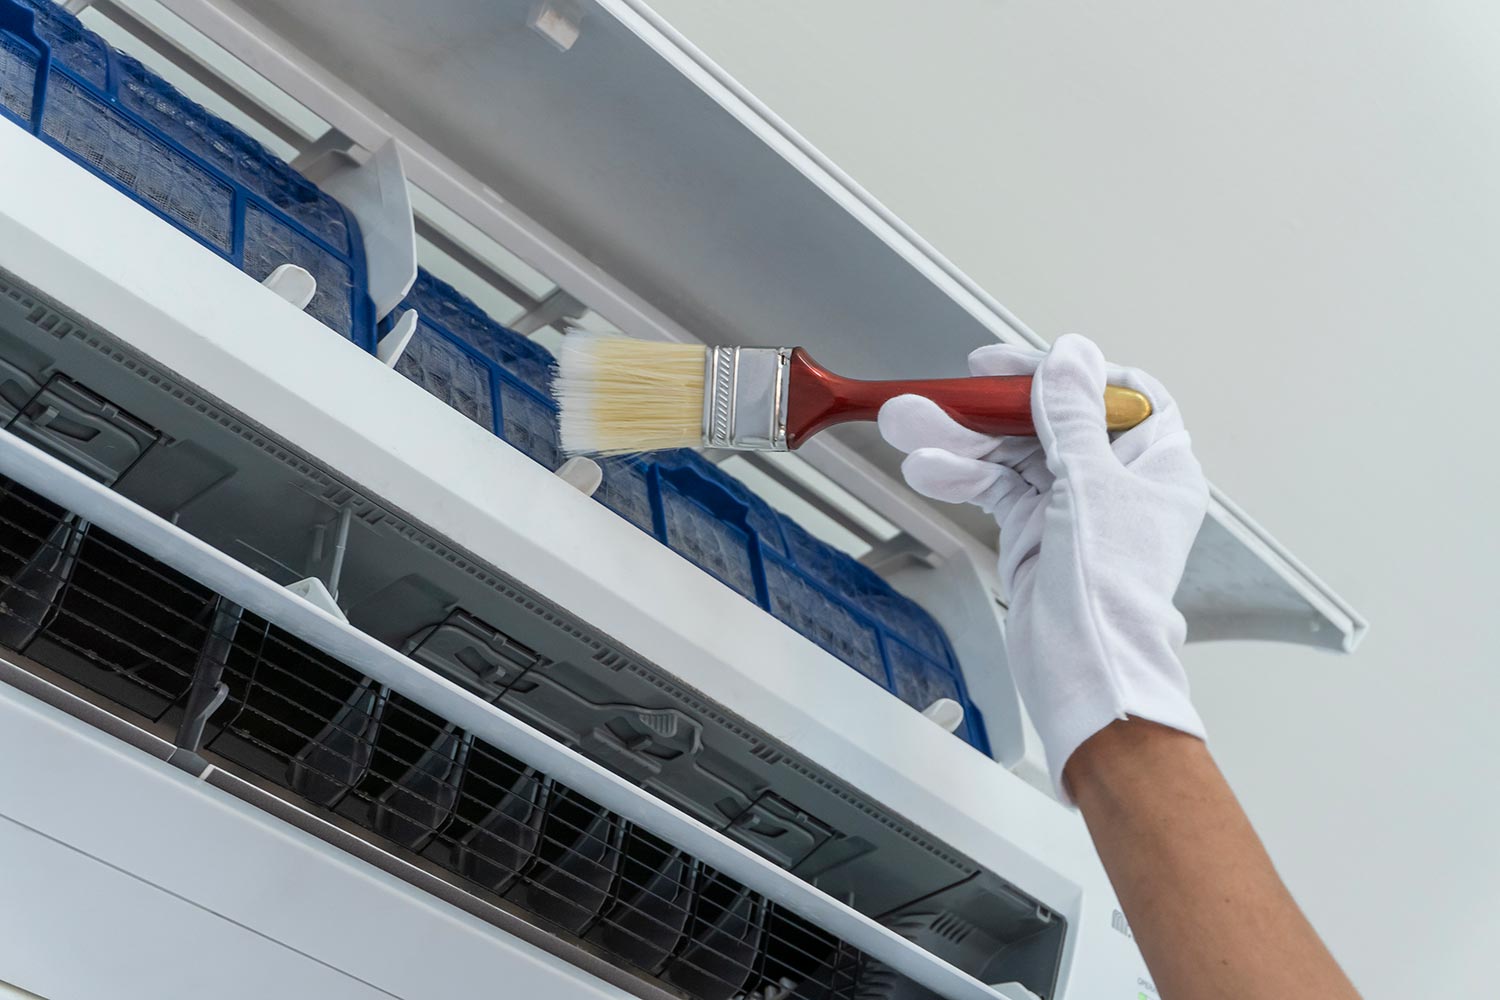 Cleaning dirty air filter inside air conditioners